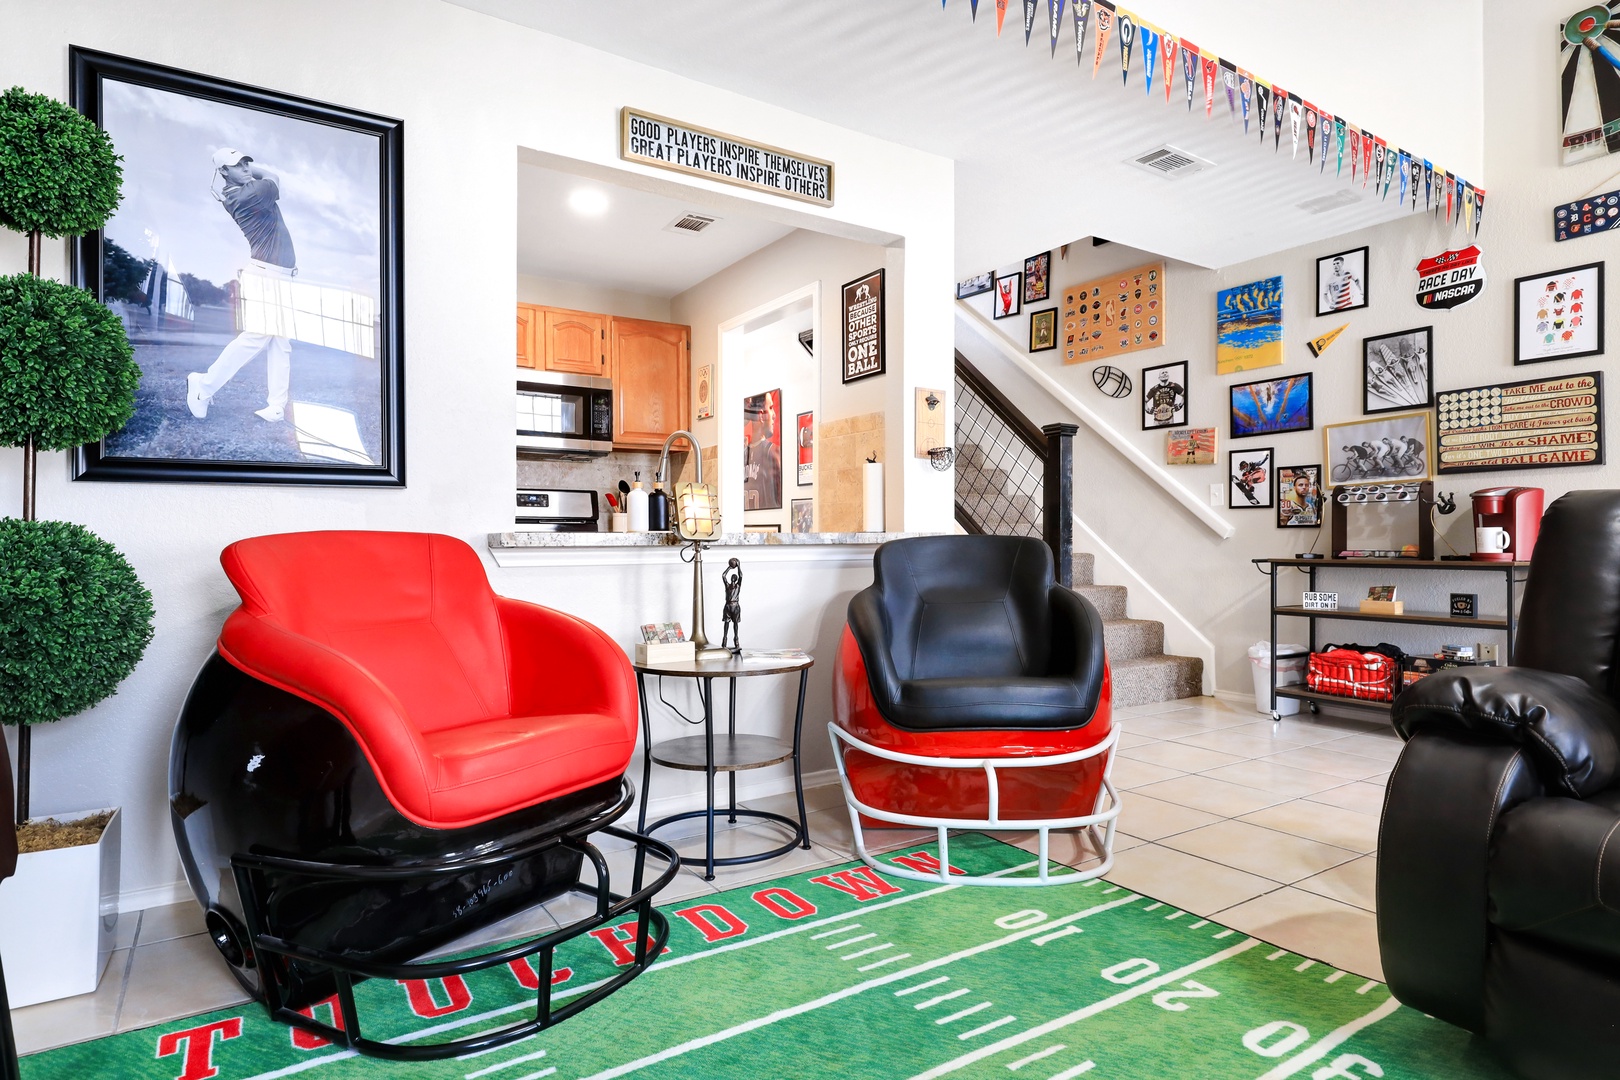 Enjoy the ultimate sports den: Smart TV, basketball, and putting green!